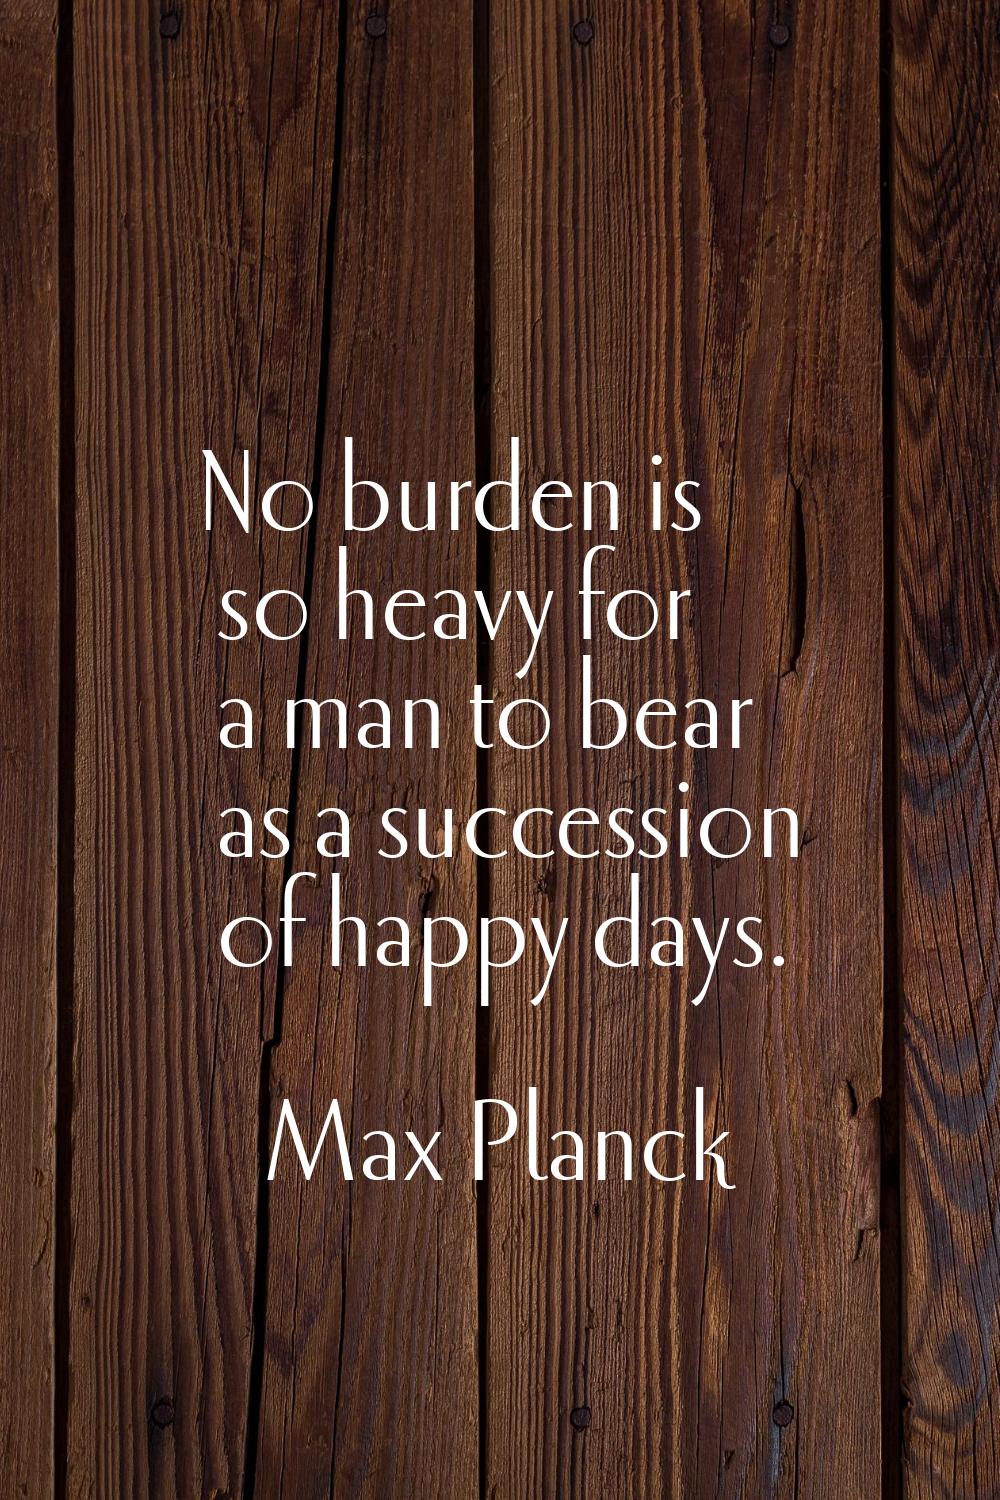 No burden is so heavy for a man to bear as a succession of happy days.